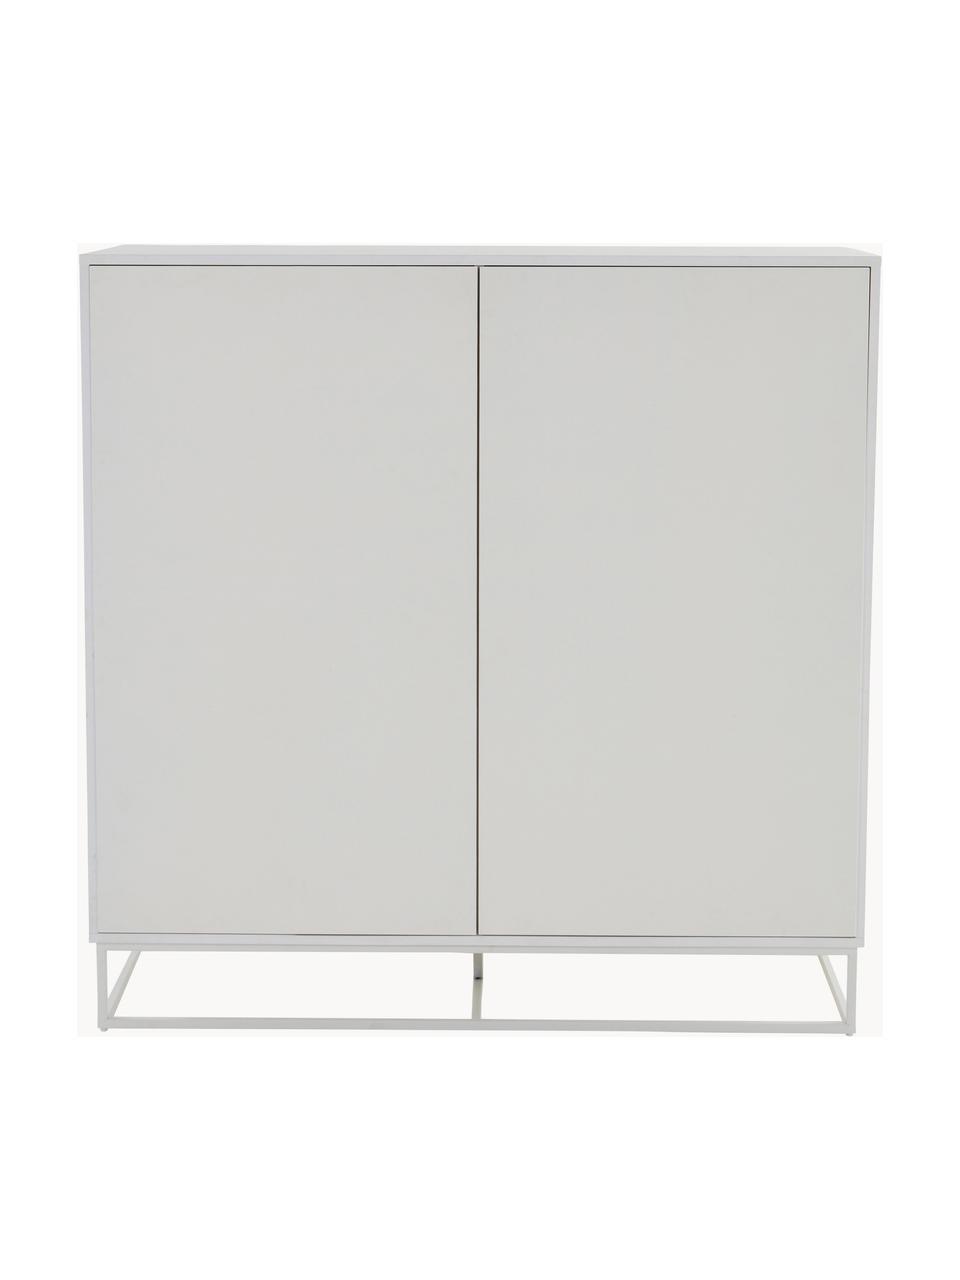 Highboard Lyckeby, Holz, Off White lackiert, B 120 x H 120 cm